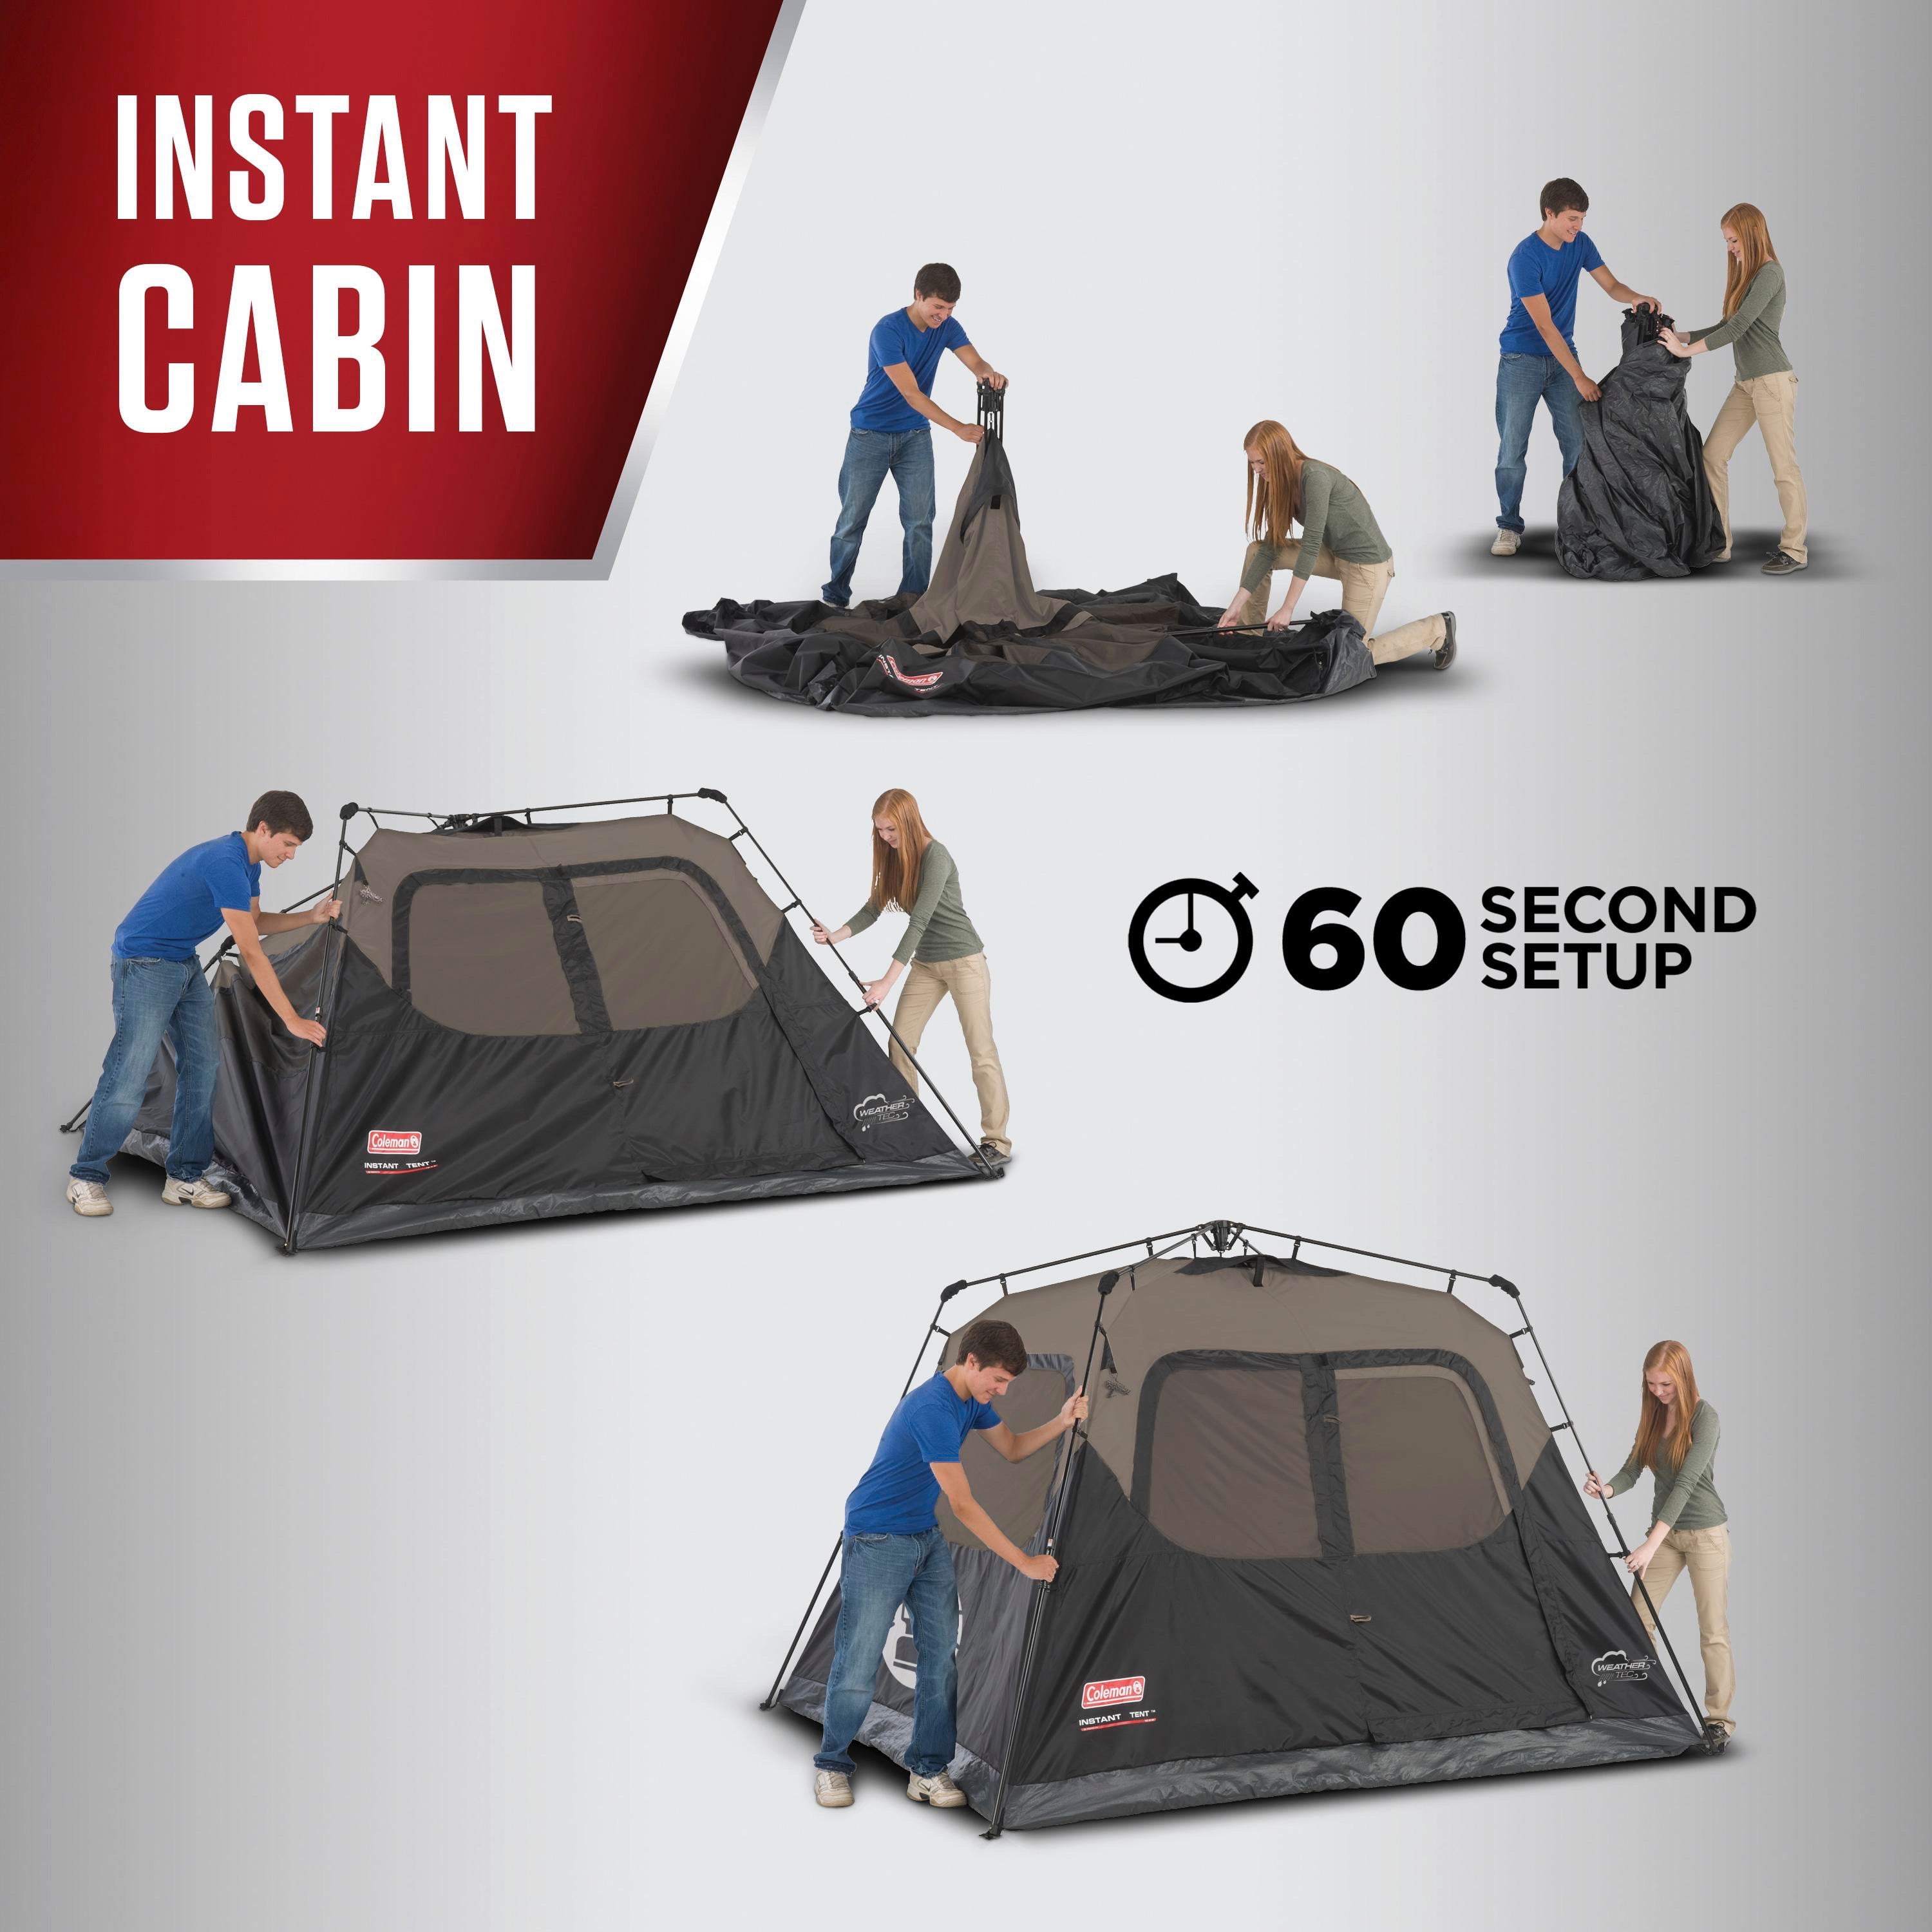 Coleman 6-Person Cabin Camping Tent with Instant Setup, 1 Room, Gray